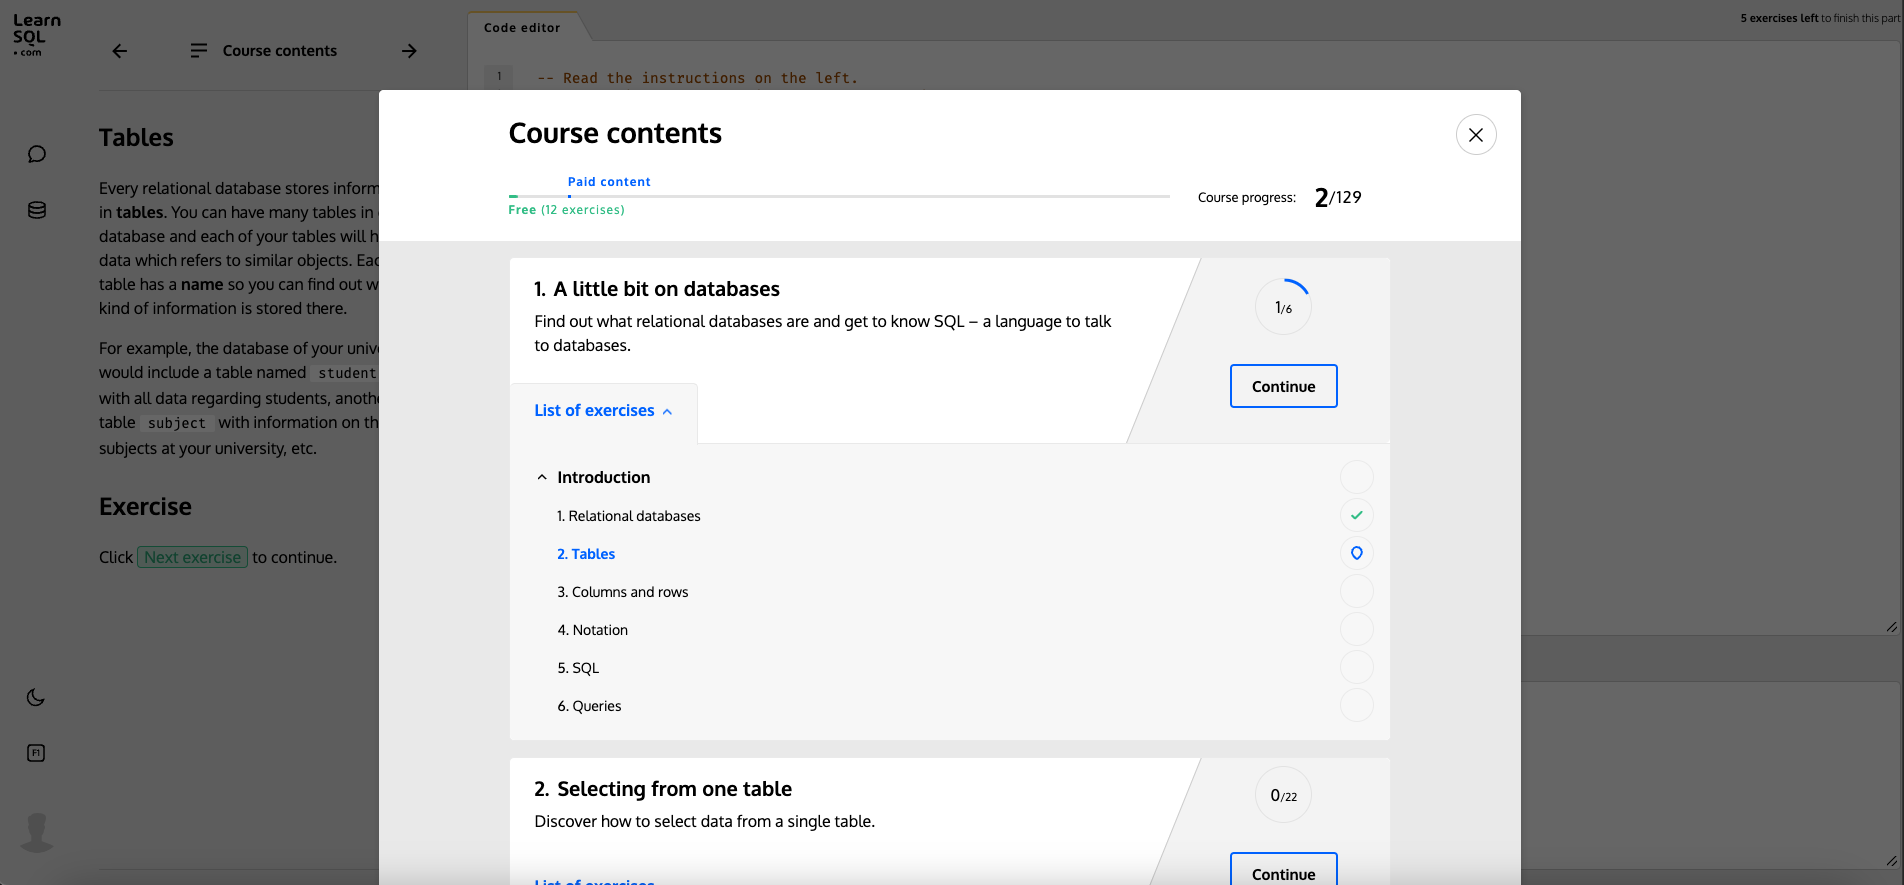 Learn SQL for Data Analysis With LearnSQL.com